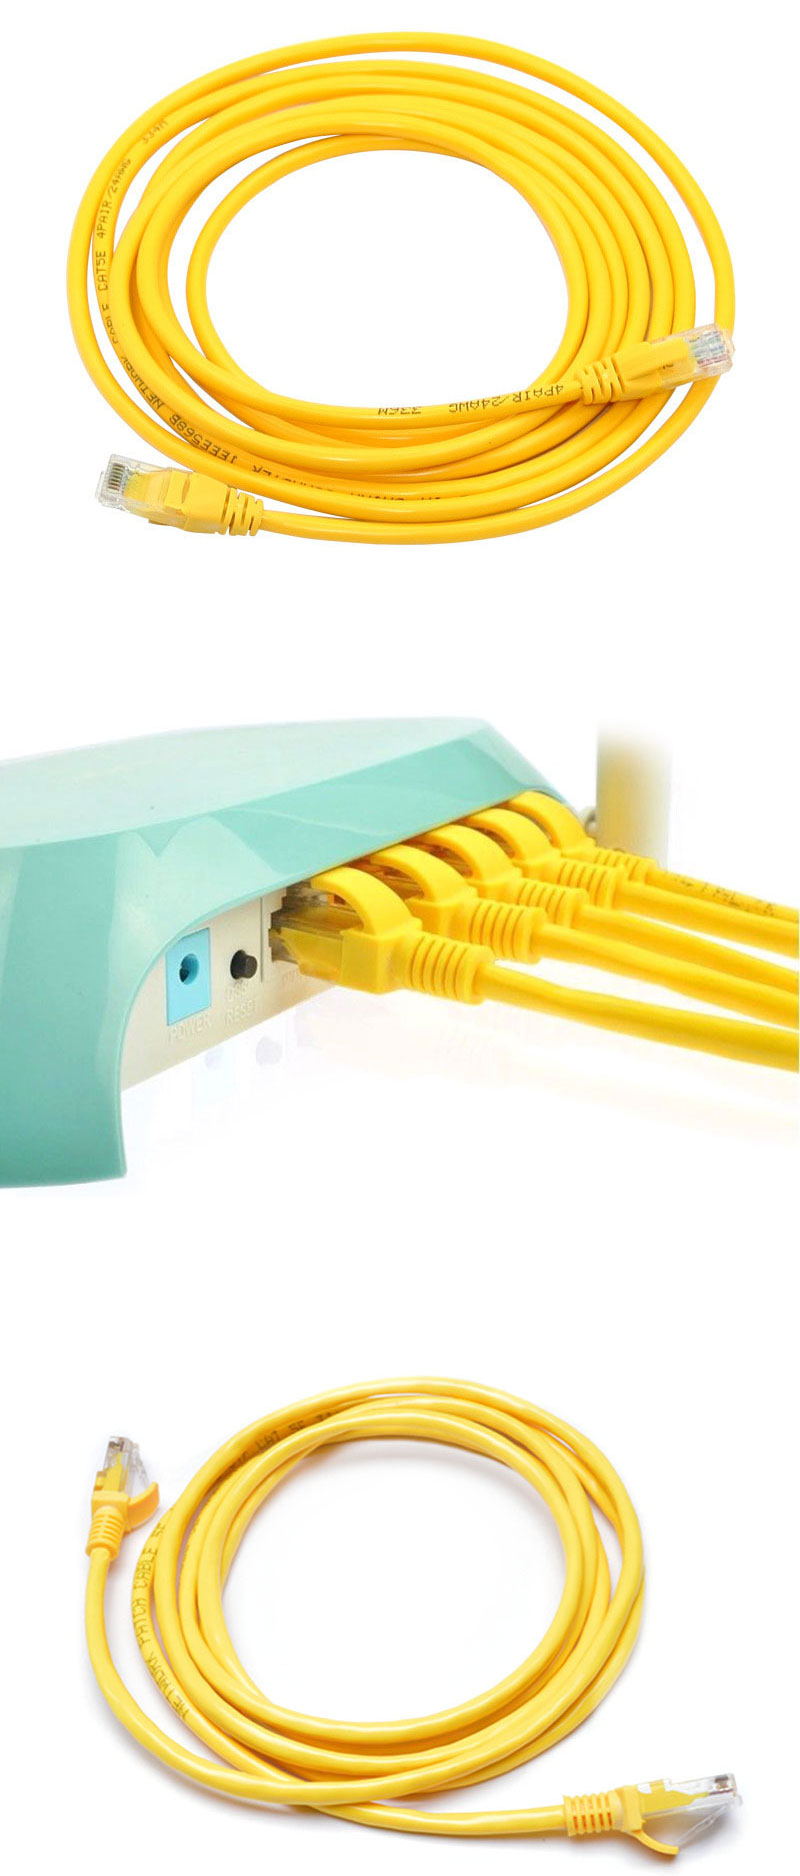 Yellow RJ45 UTP cat5e network extension cable